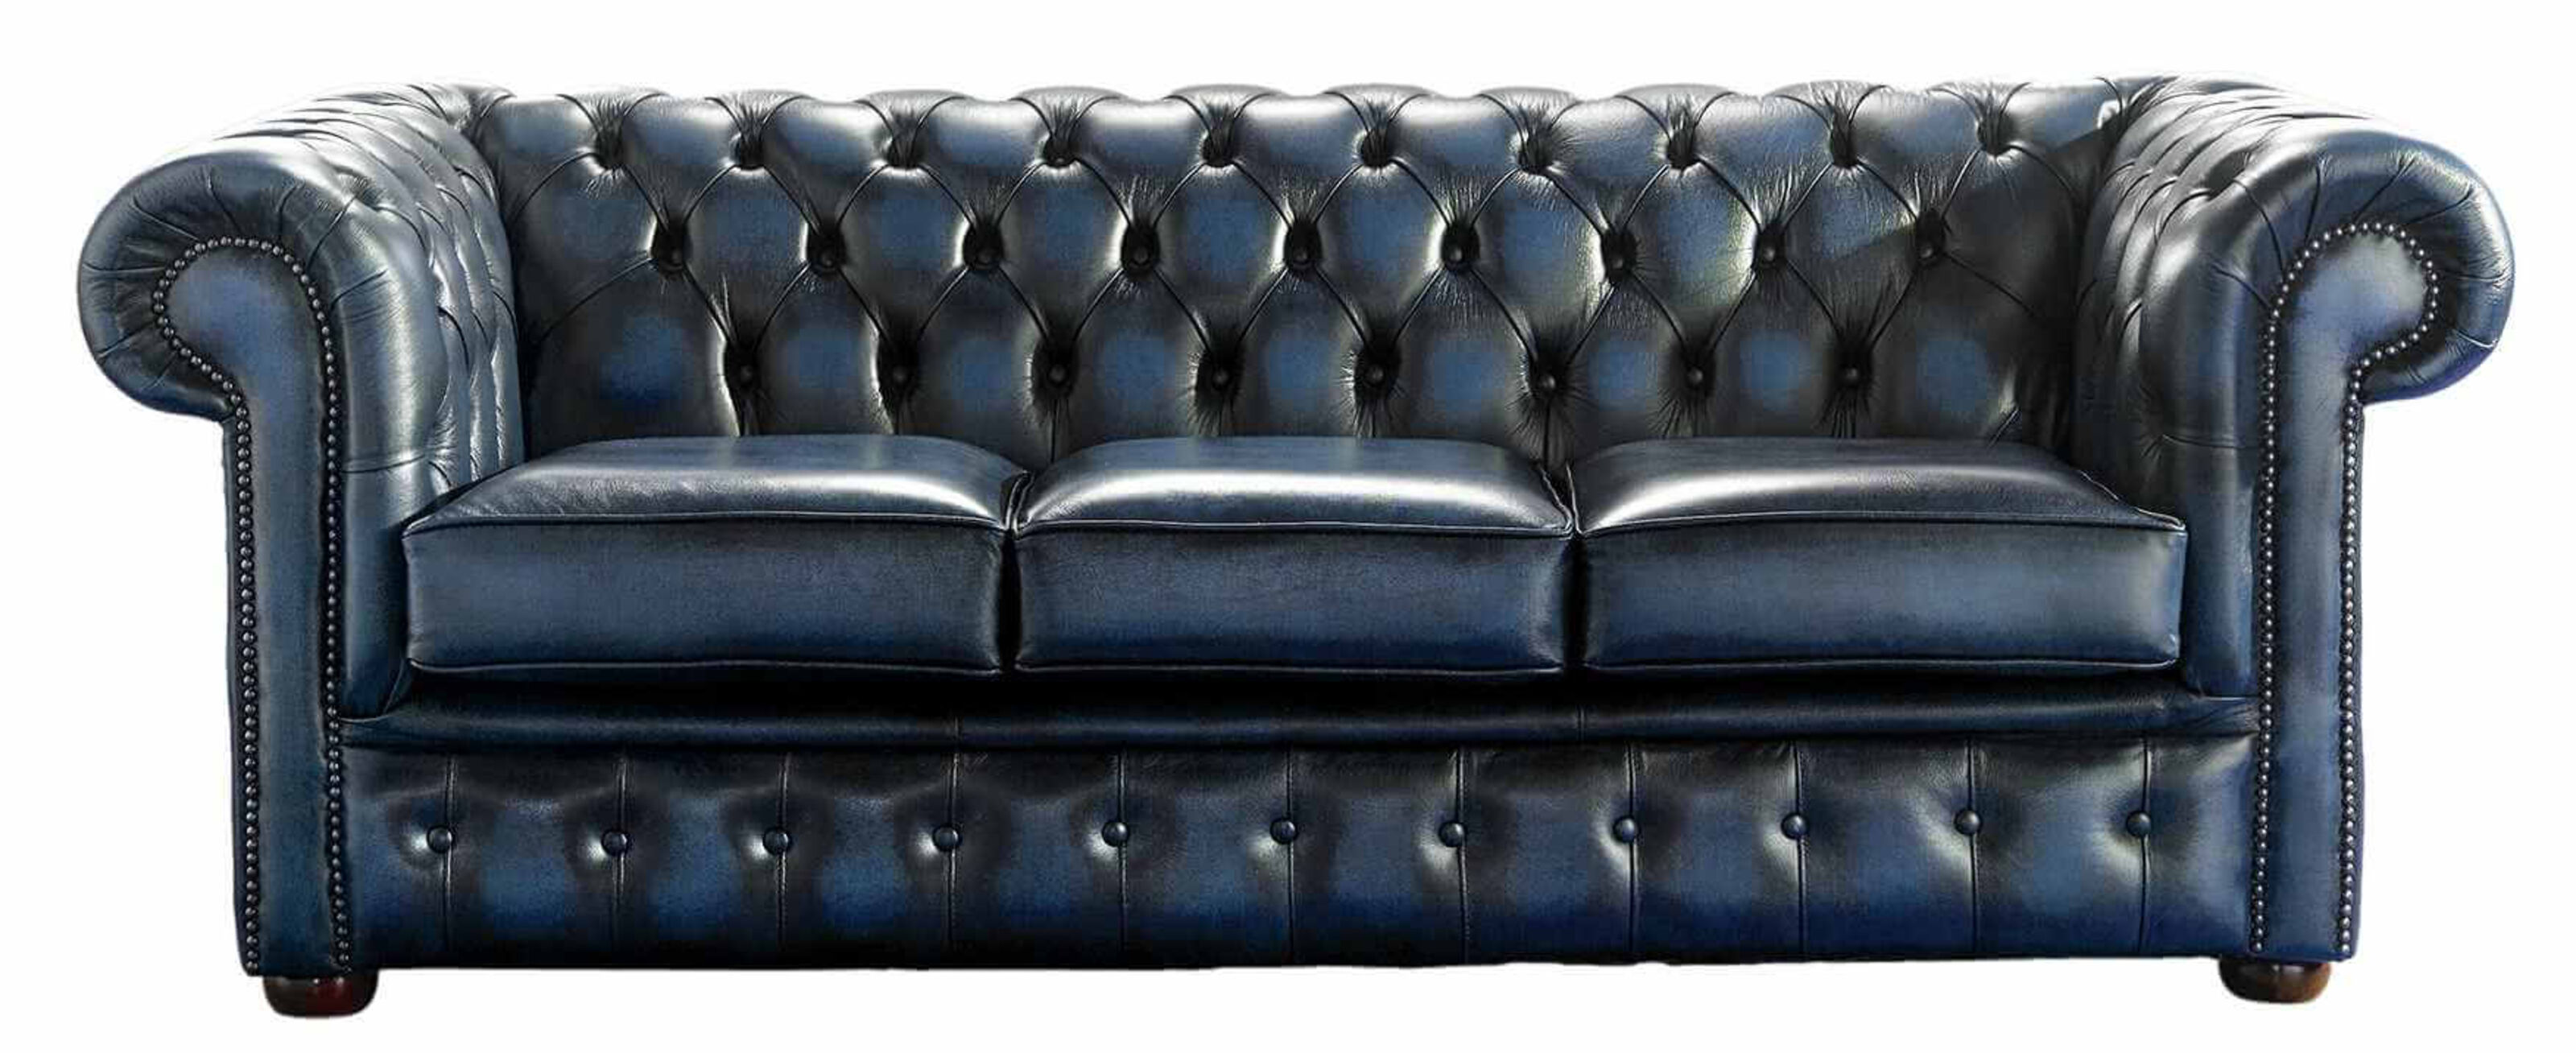 Dual-Function Design: Chesterfield Sofas Featuring a Hidden Bed  %Post Title